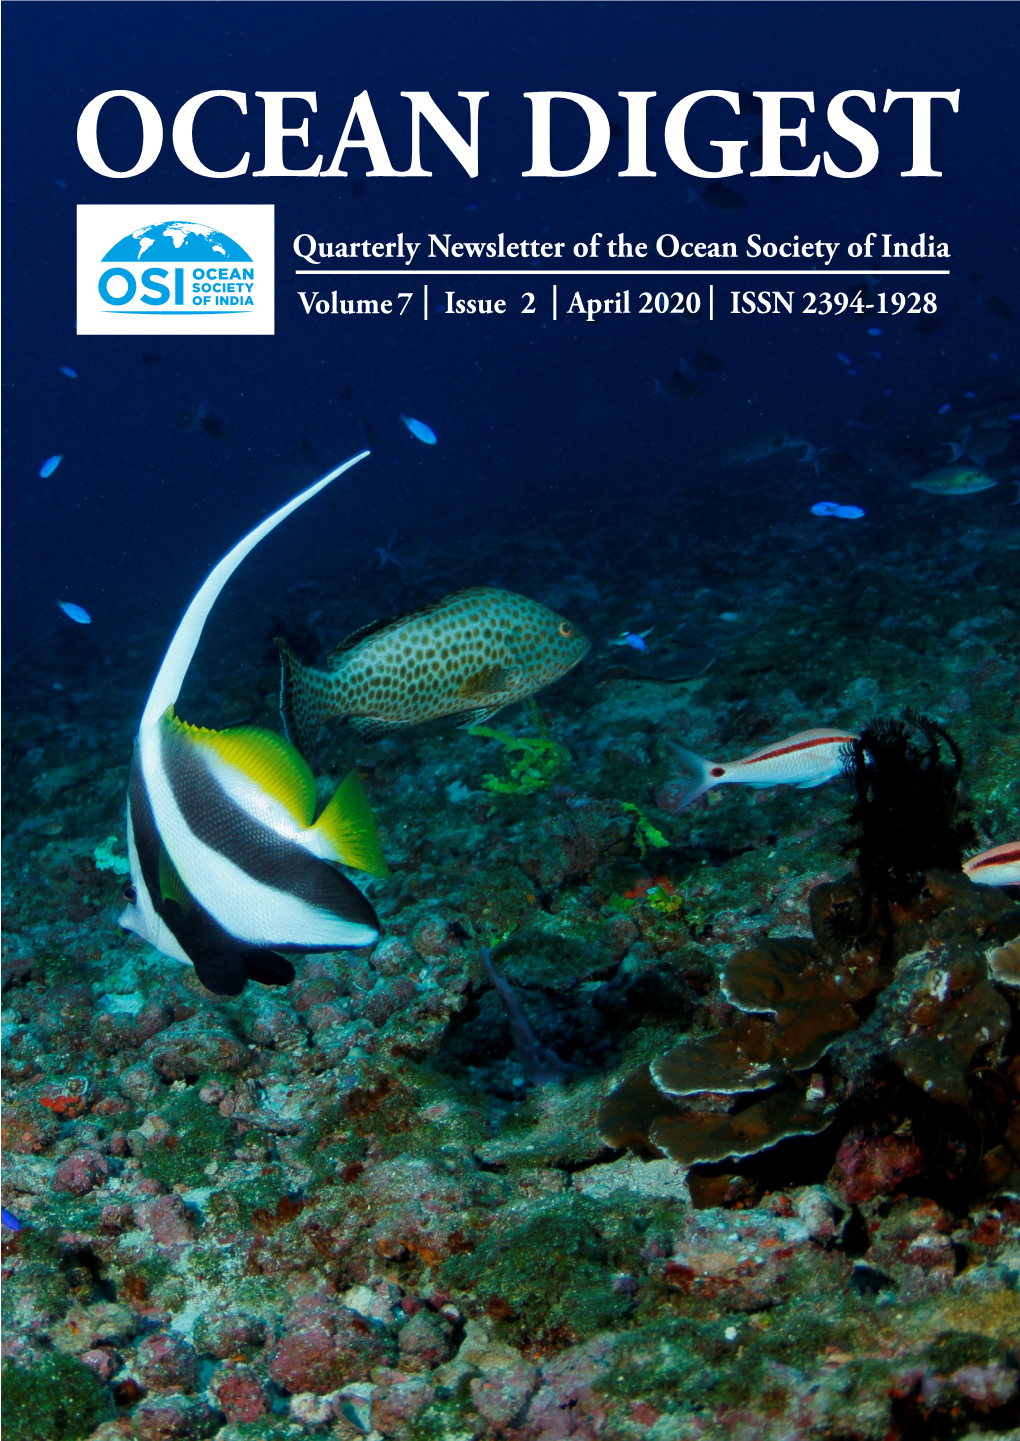 Quarterly Newsletter of the Ocean Society of India Volum E 7 | Issue 2 | April 2020 | ISSN 2394-1928 Ocean Digest Quarterly Newsletter of the Ocean Society of India